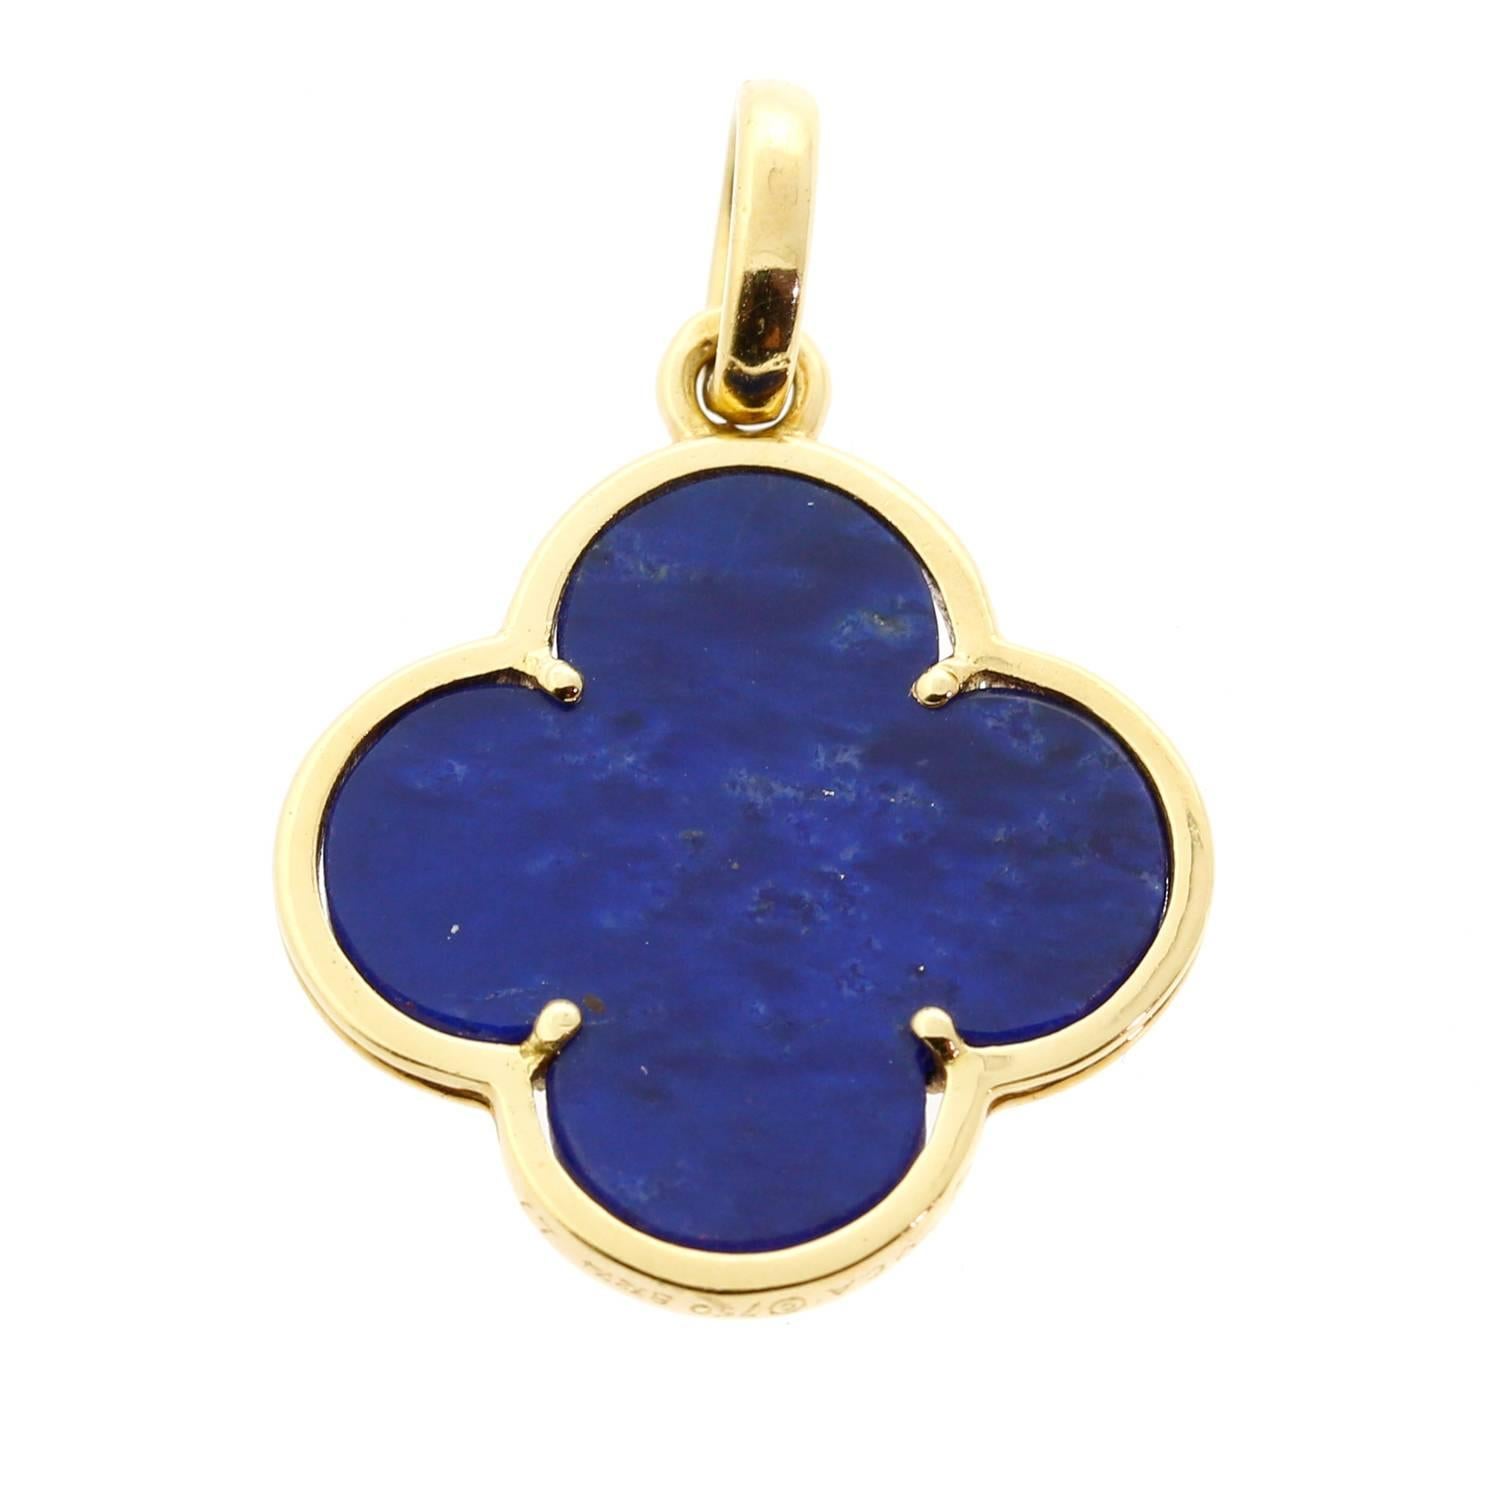 A magnificent Van Cleef & Arpels necklace pendant crafted in 18k yellow gold featuring a lapis stone.